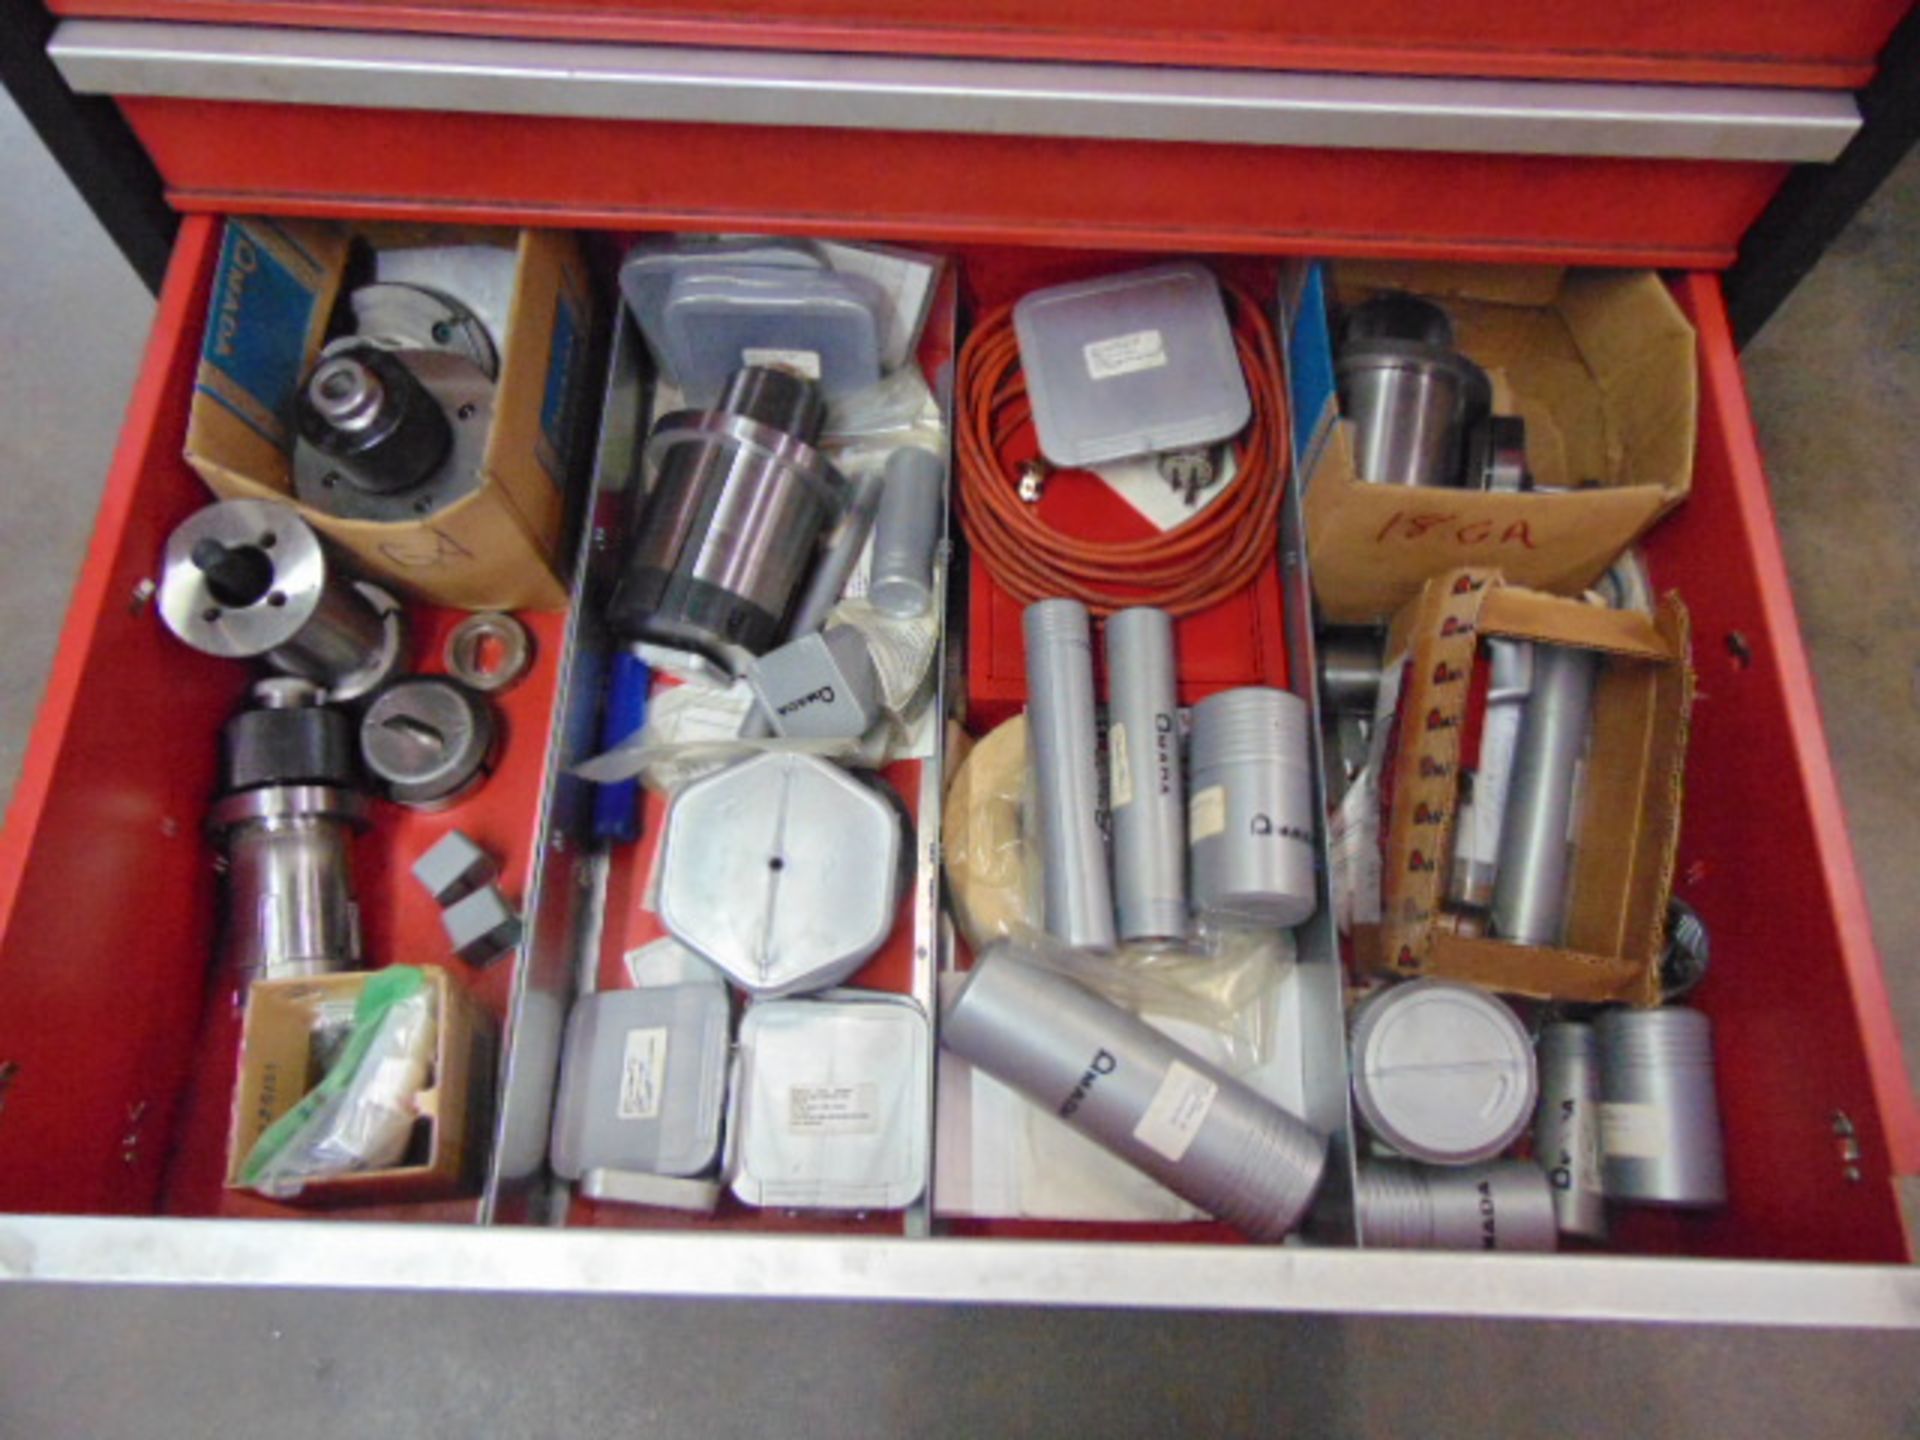 LOT OF PUNCH & DIE TOOLING, assorted, w/ tool cabinet - Image 10 of 10